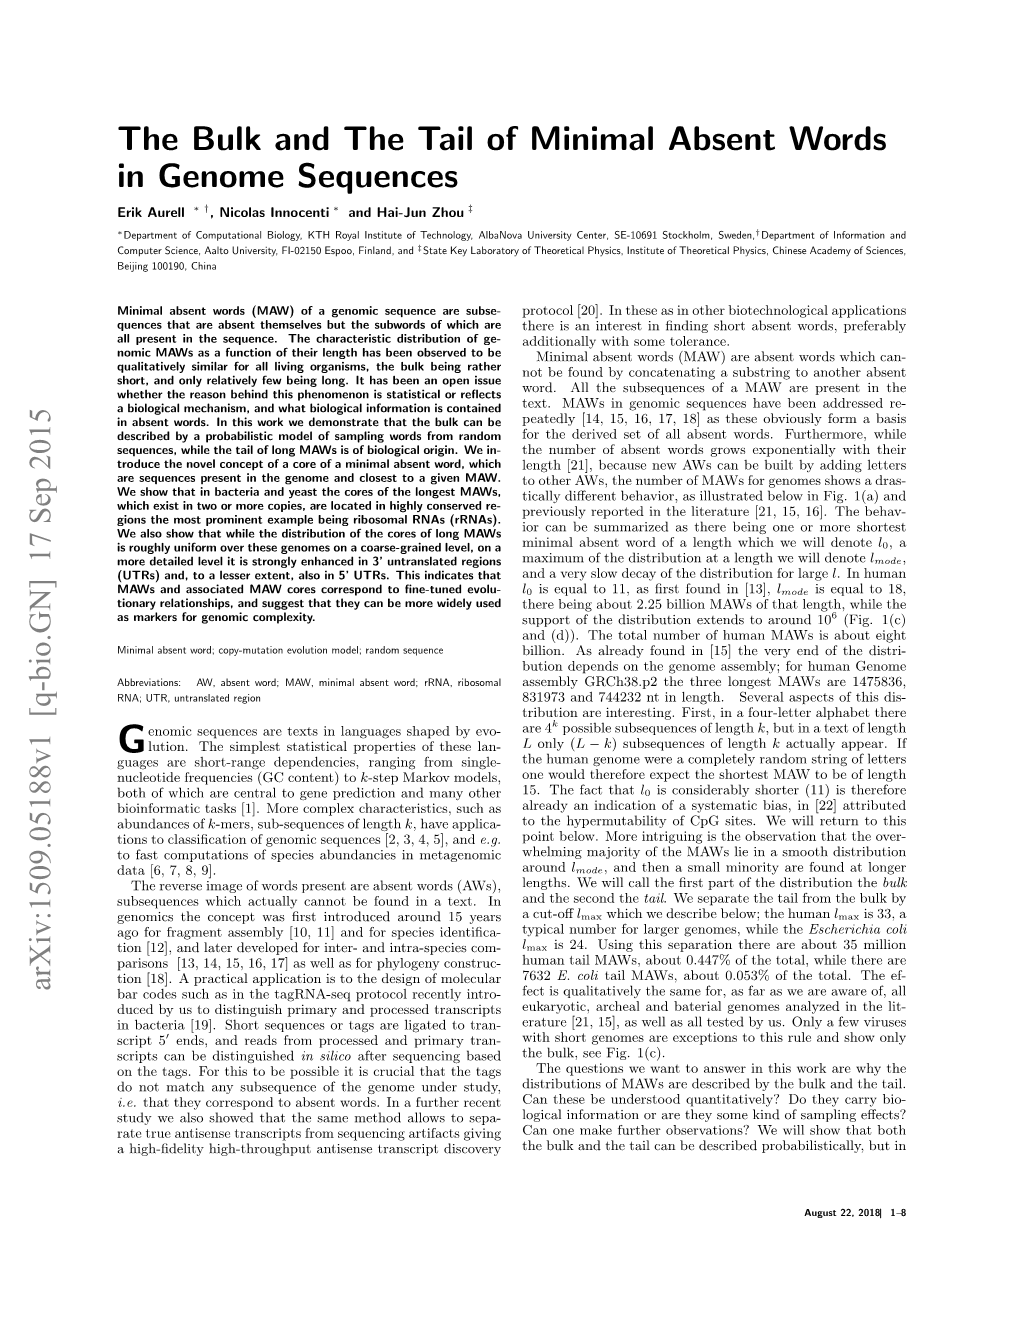 The Bulk and the Tail of Minimal Absent Words in Genome Sequences